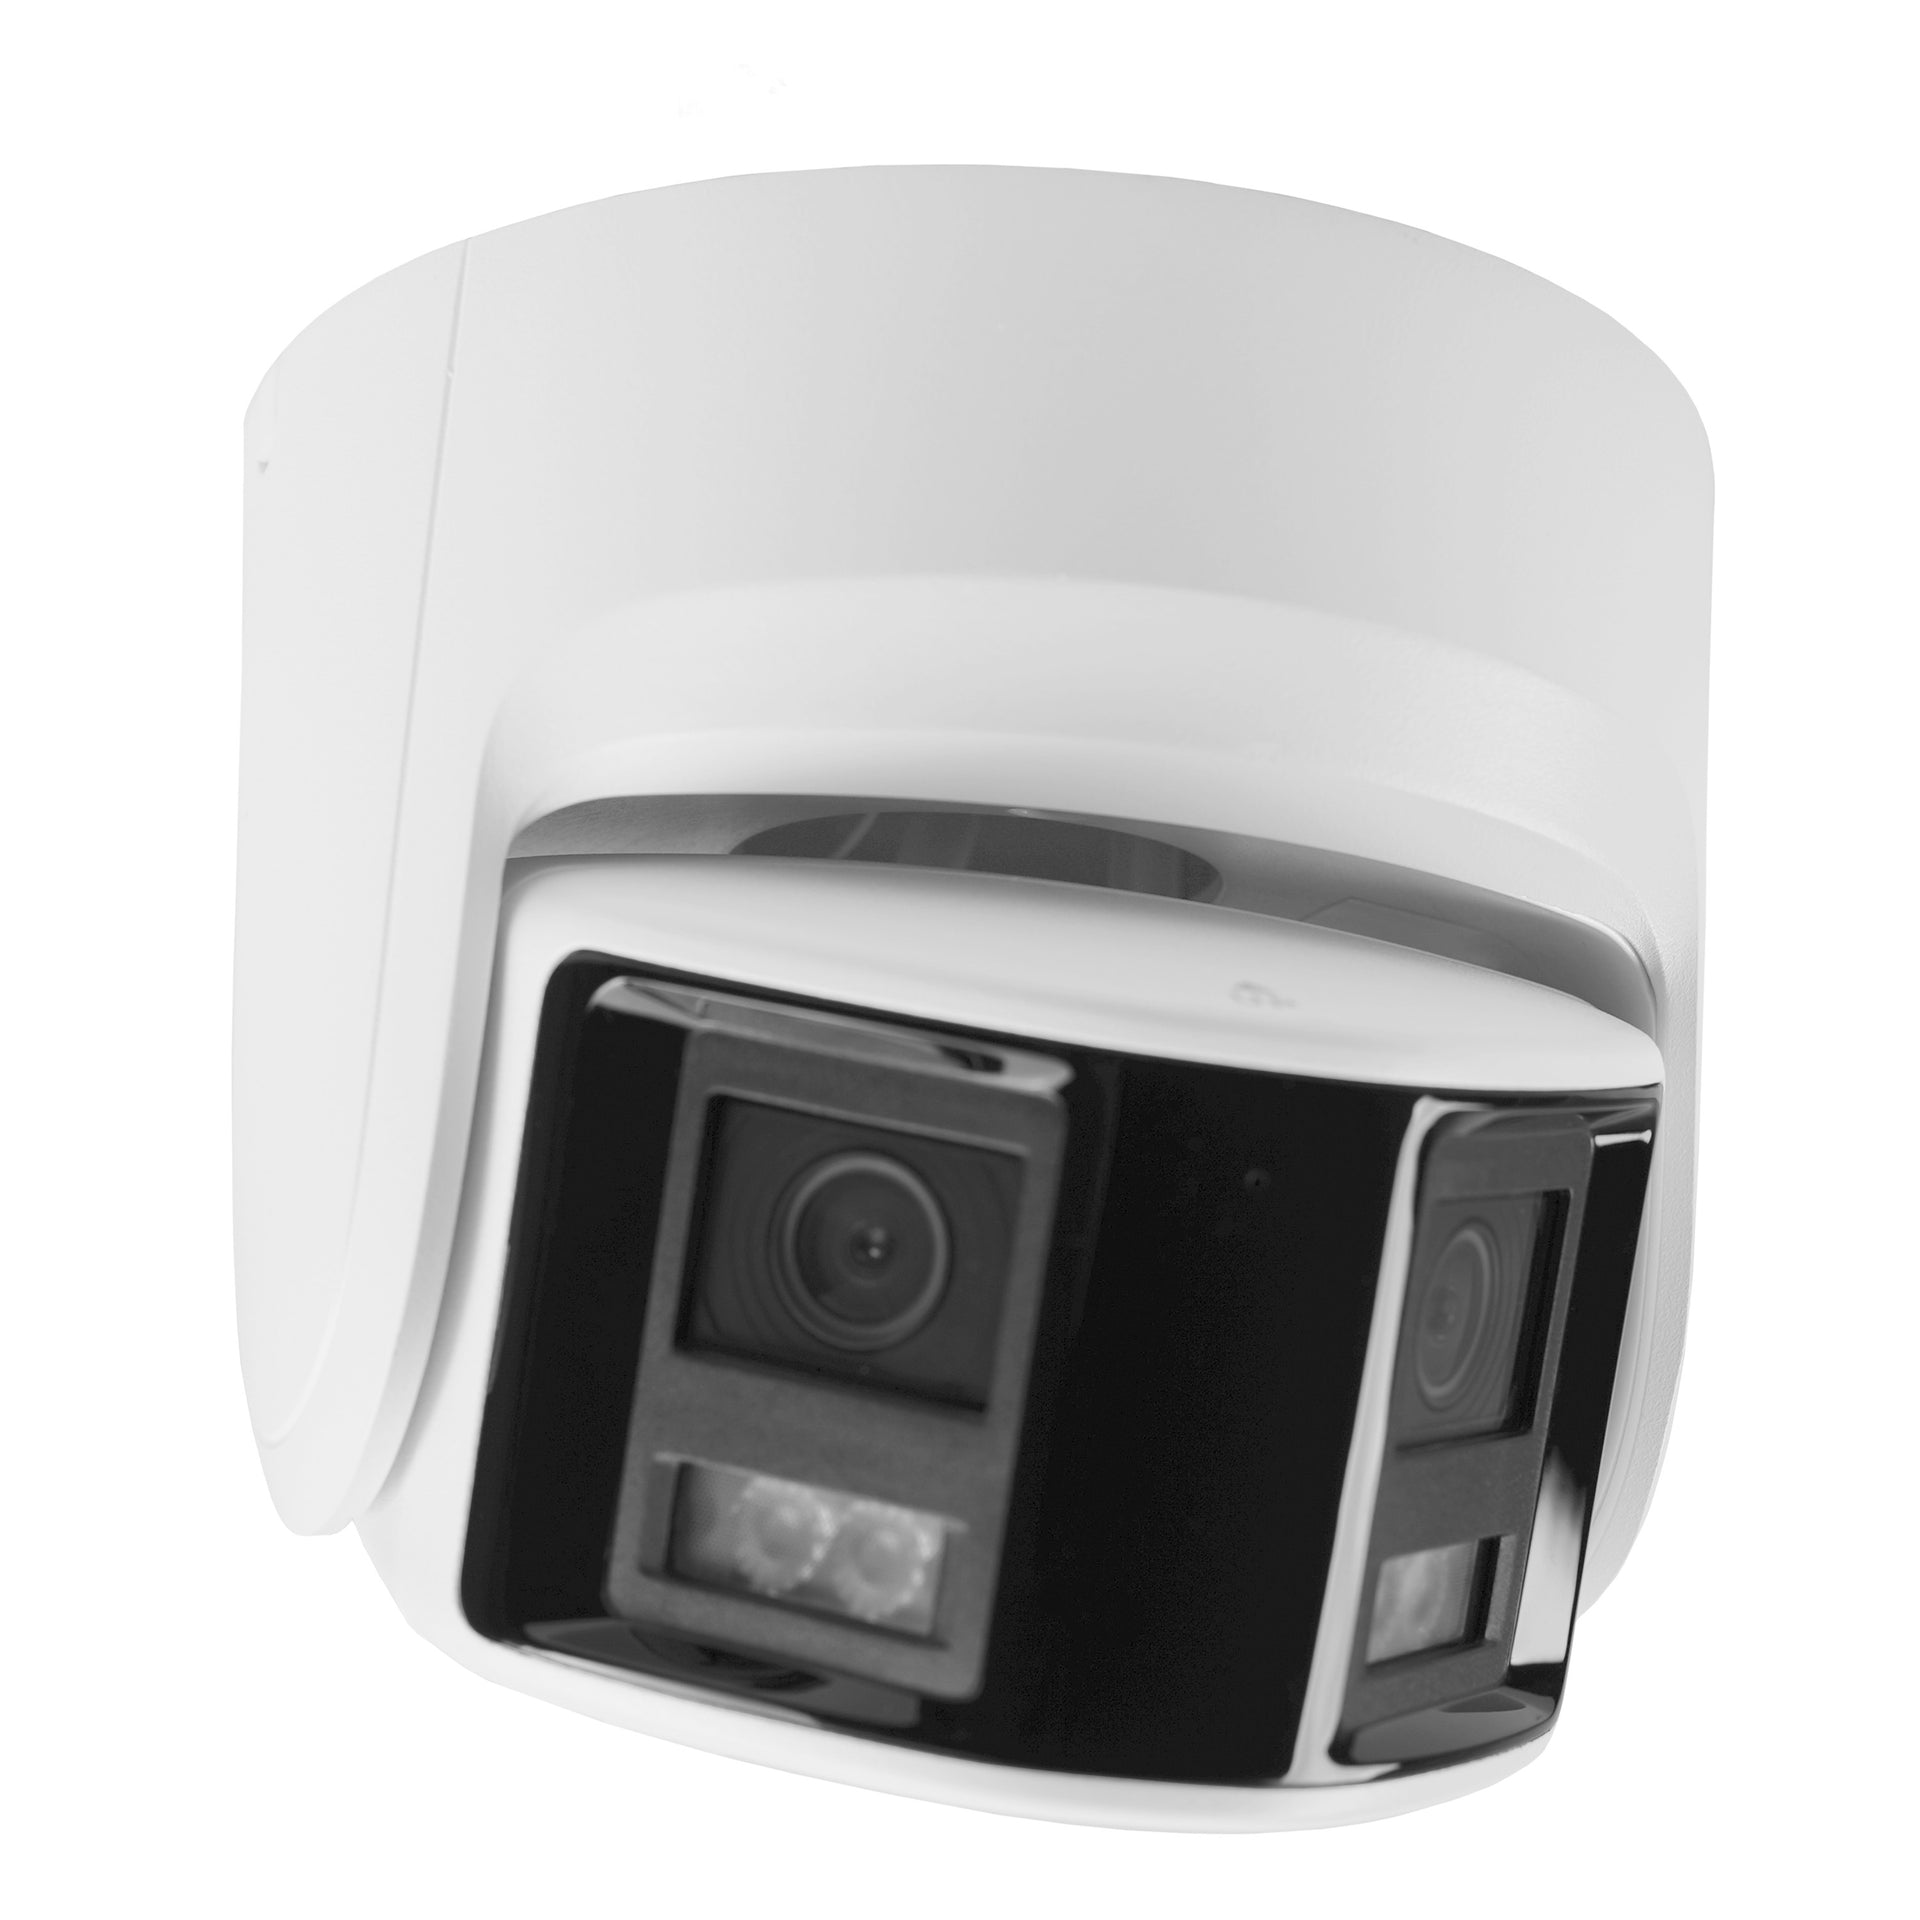 A third front view of the IP dome camera.